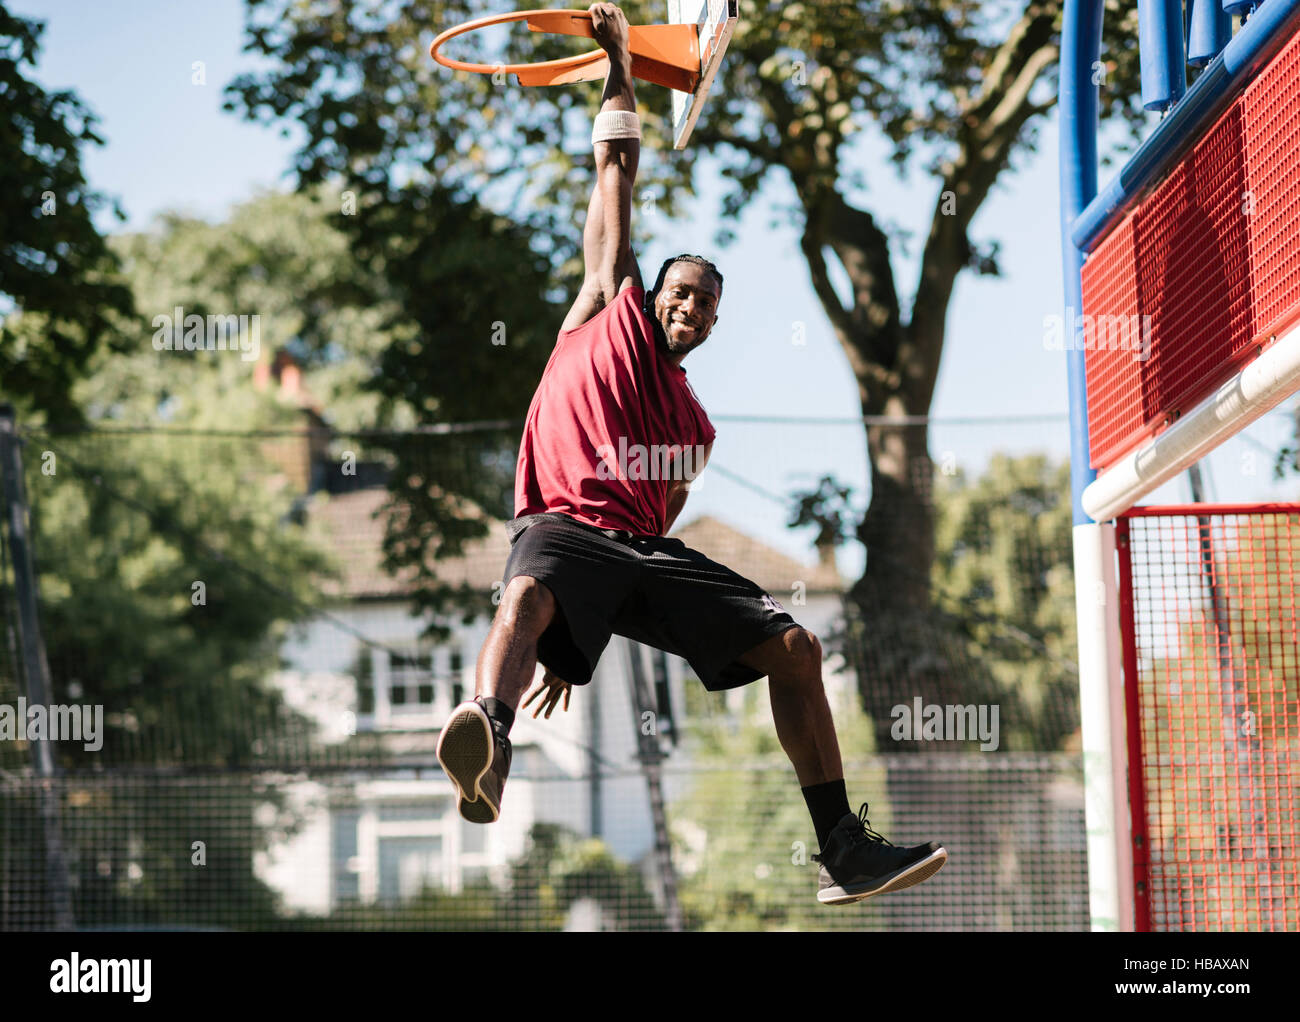 Portrait of young male basketball player hanging from basketball hoop Stock Photo